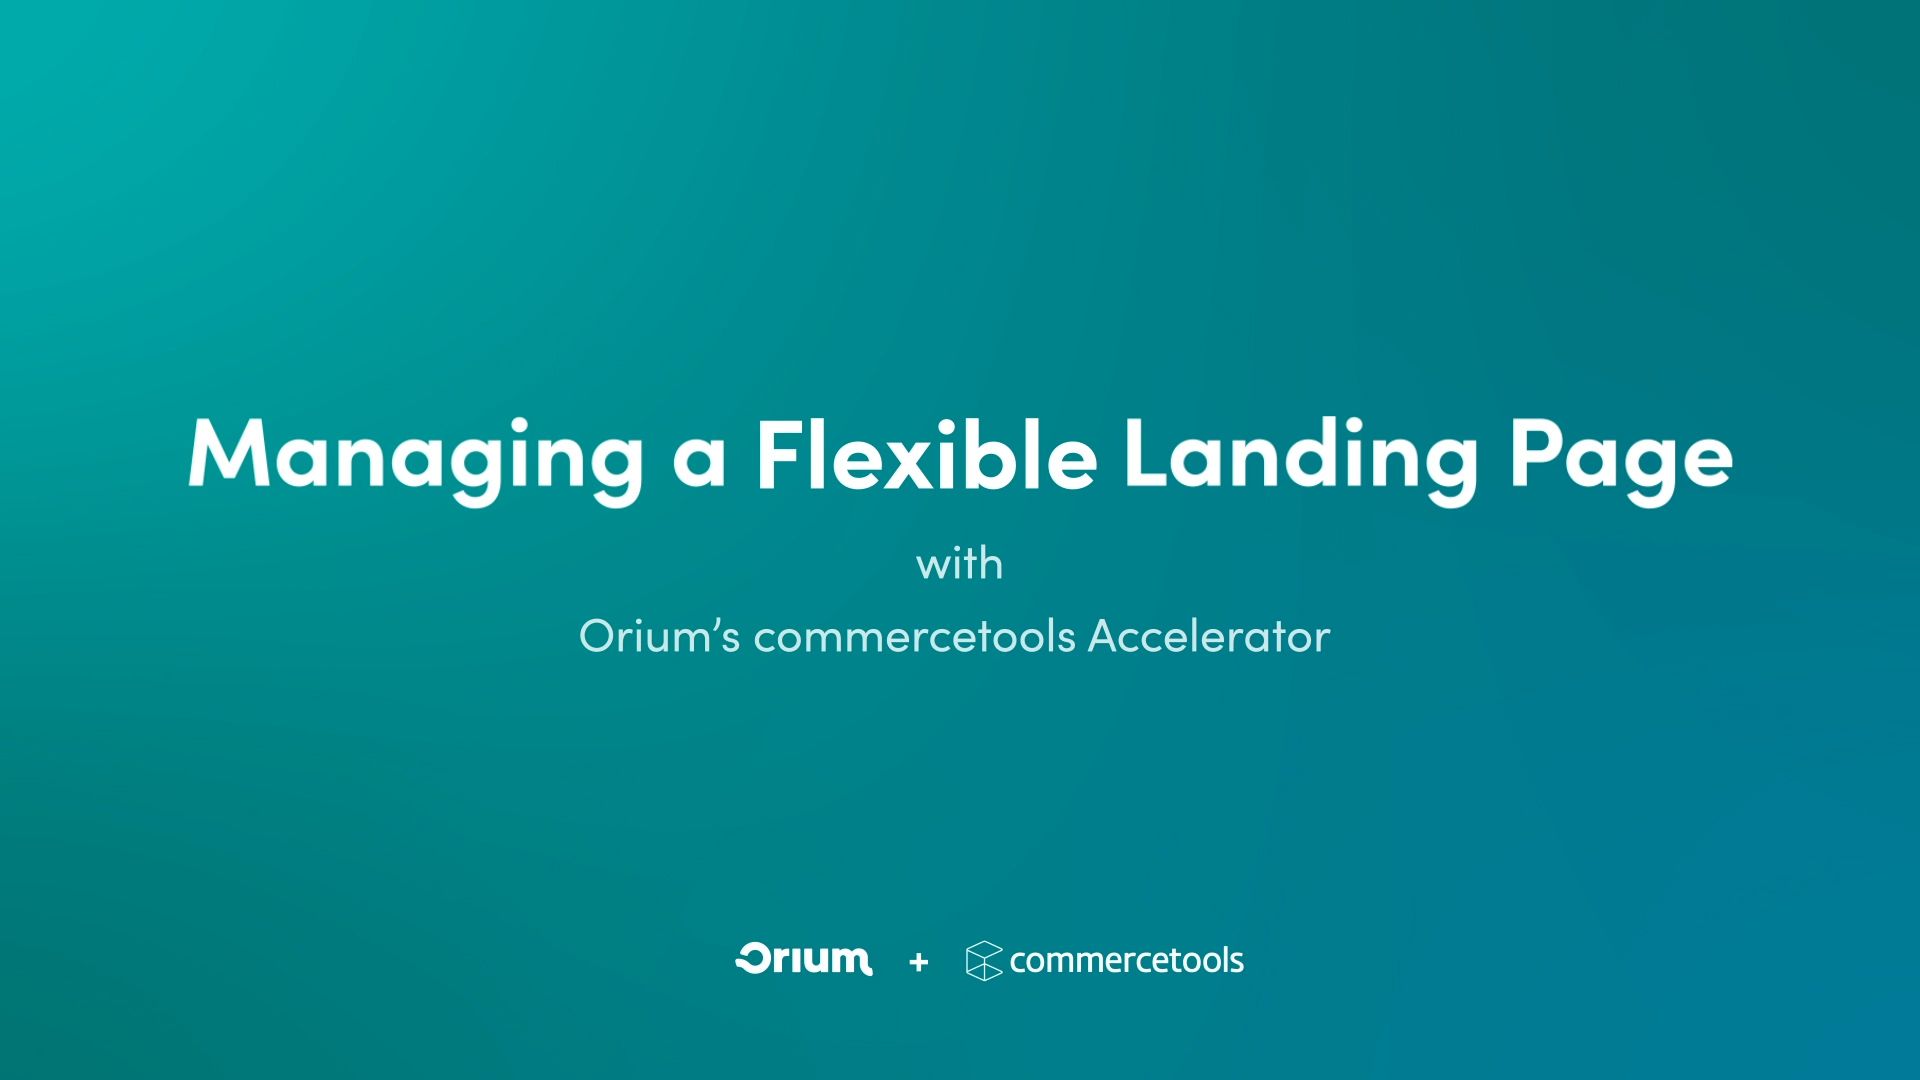 Commercetools Accelerator "Managing Flexible Landing Page" video cover.